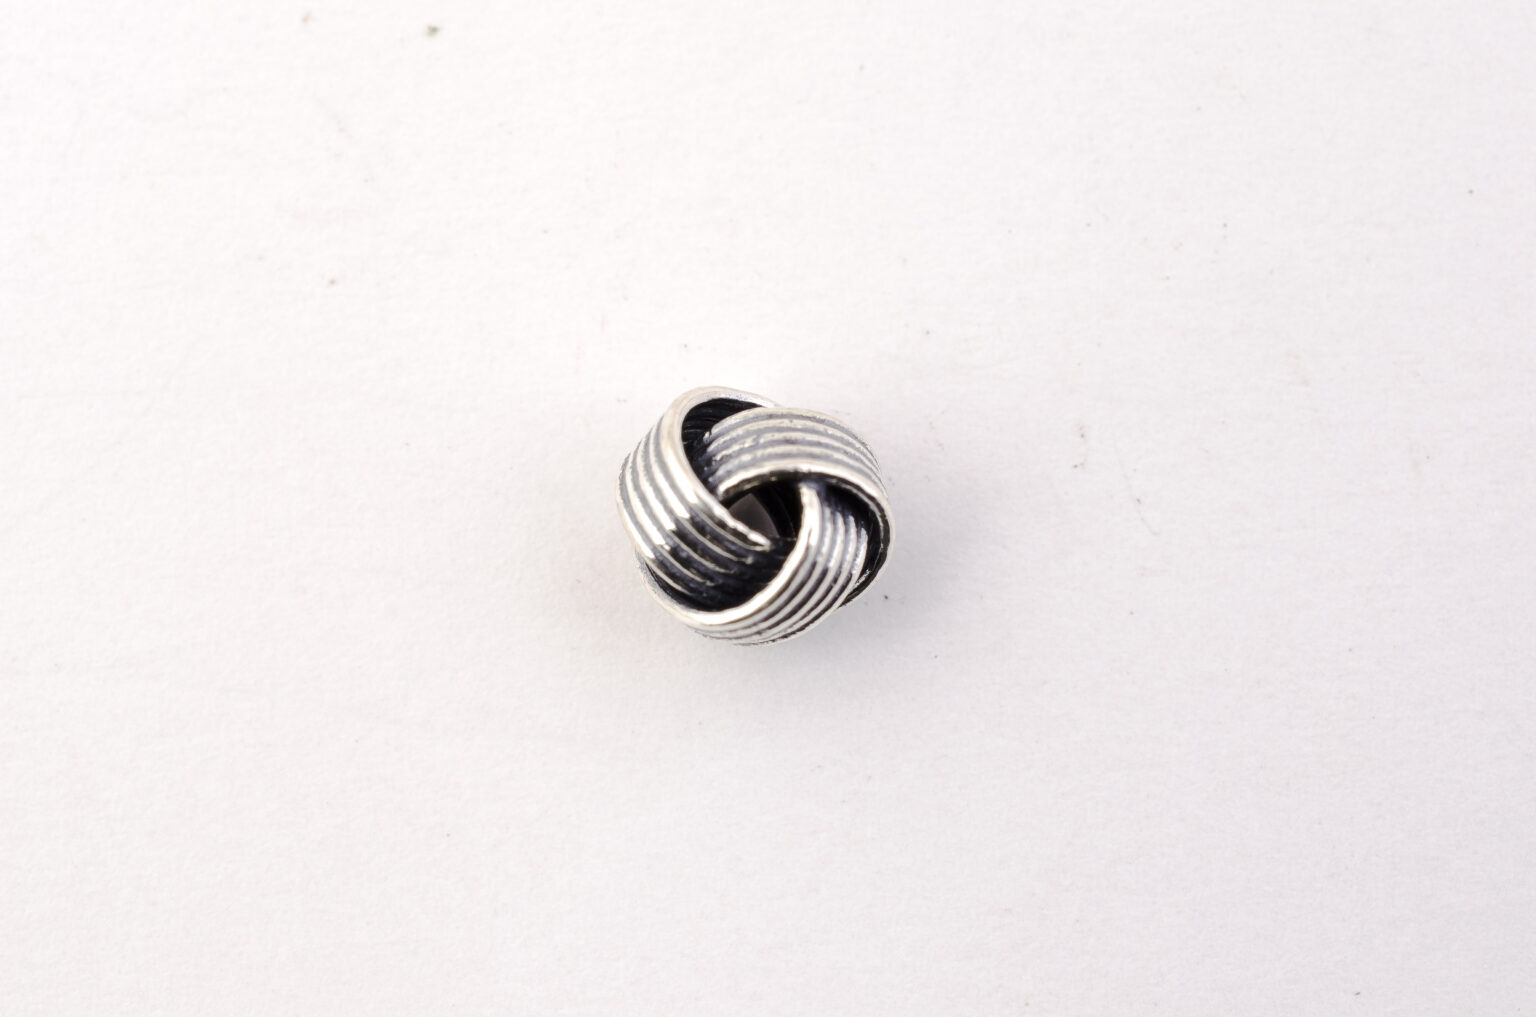 Handmade Sterling Silver Tri-Infinity Knot Bead